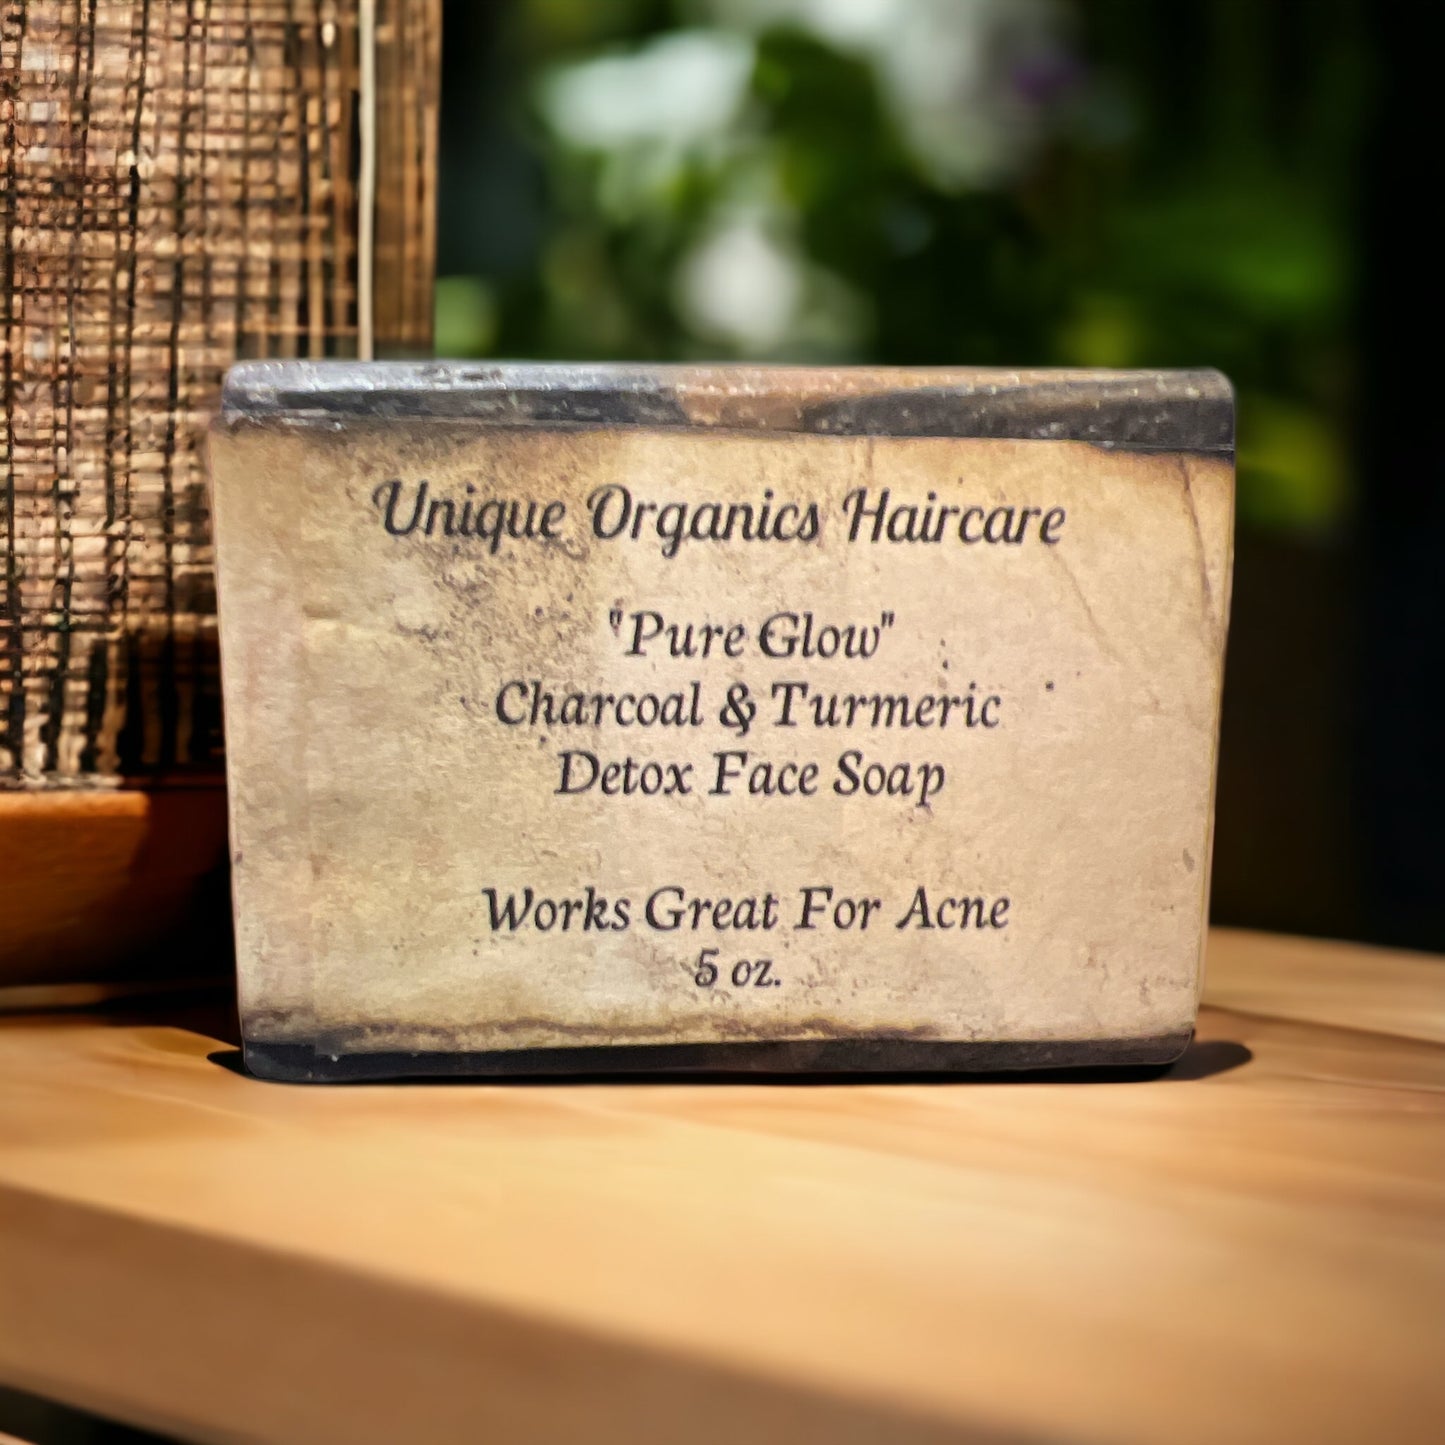 "Pure Glow"  Charcoal and Turmeric Detox Face Soap for Acne